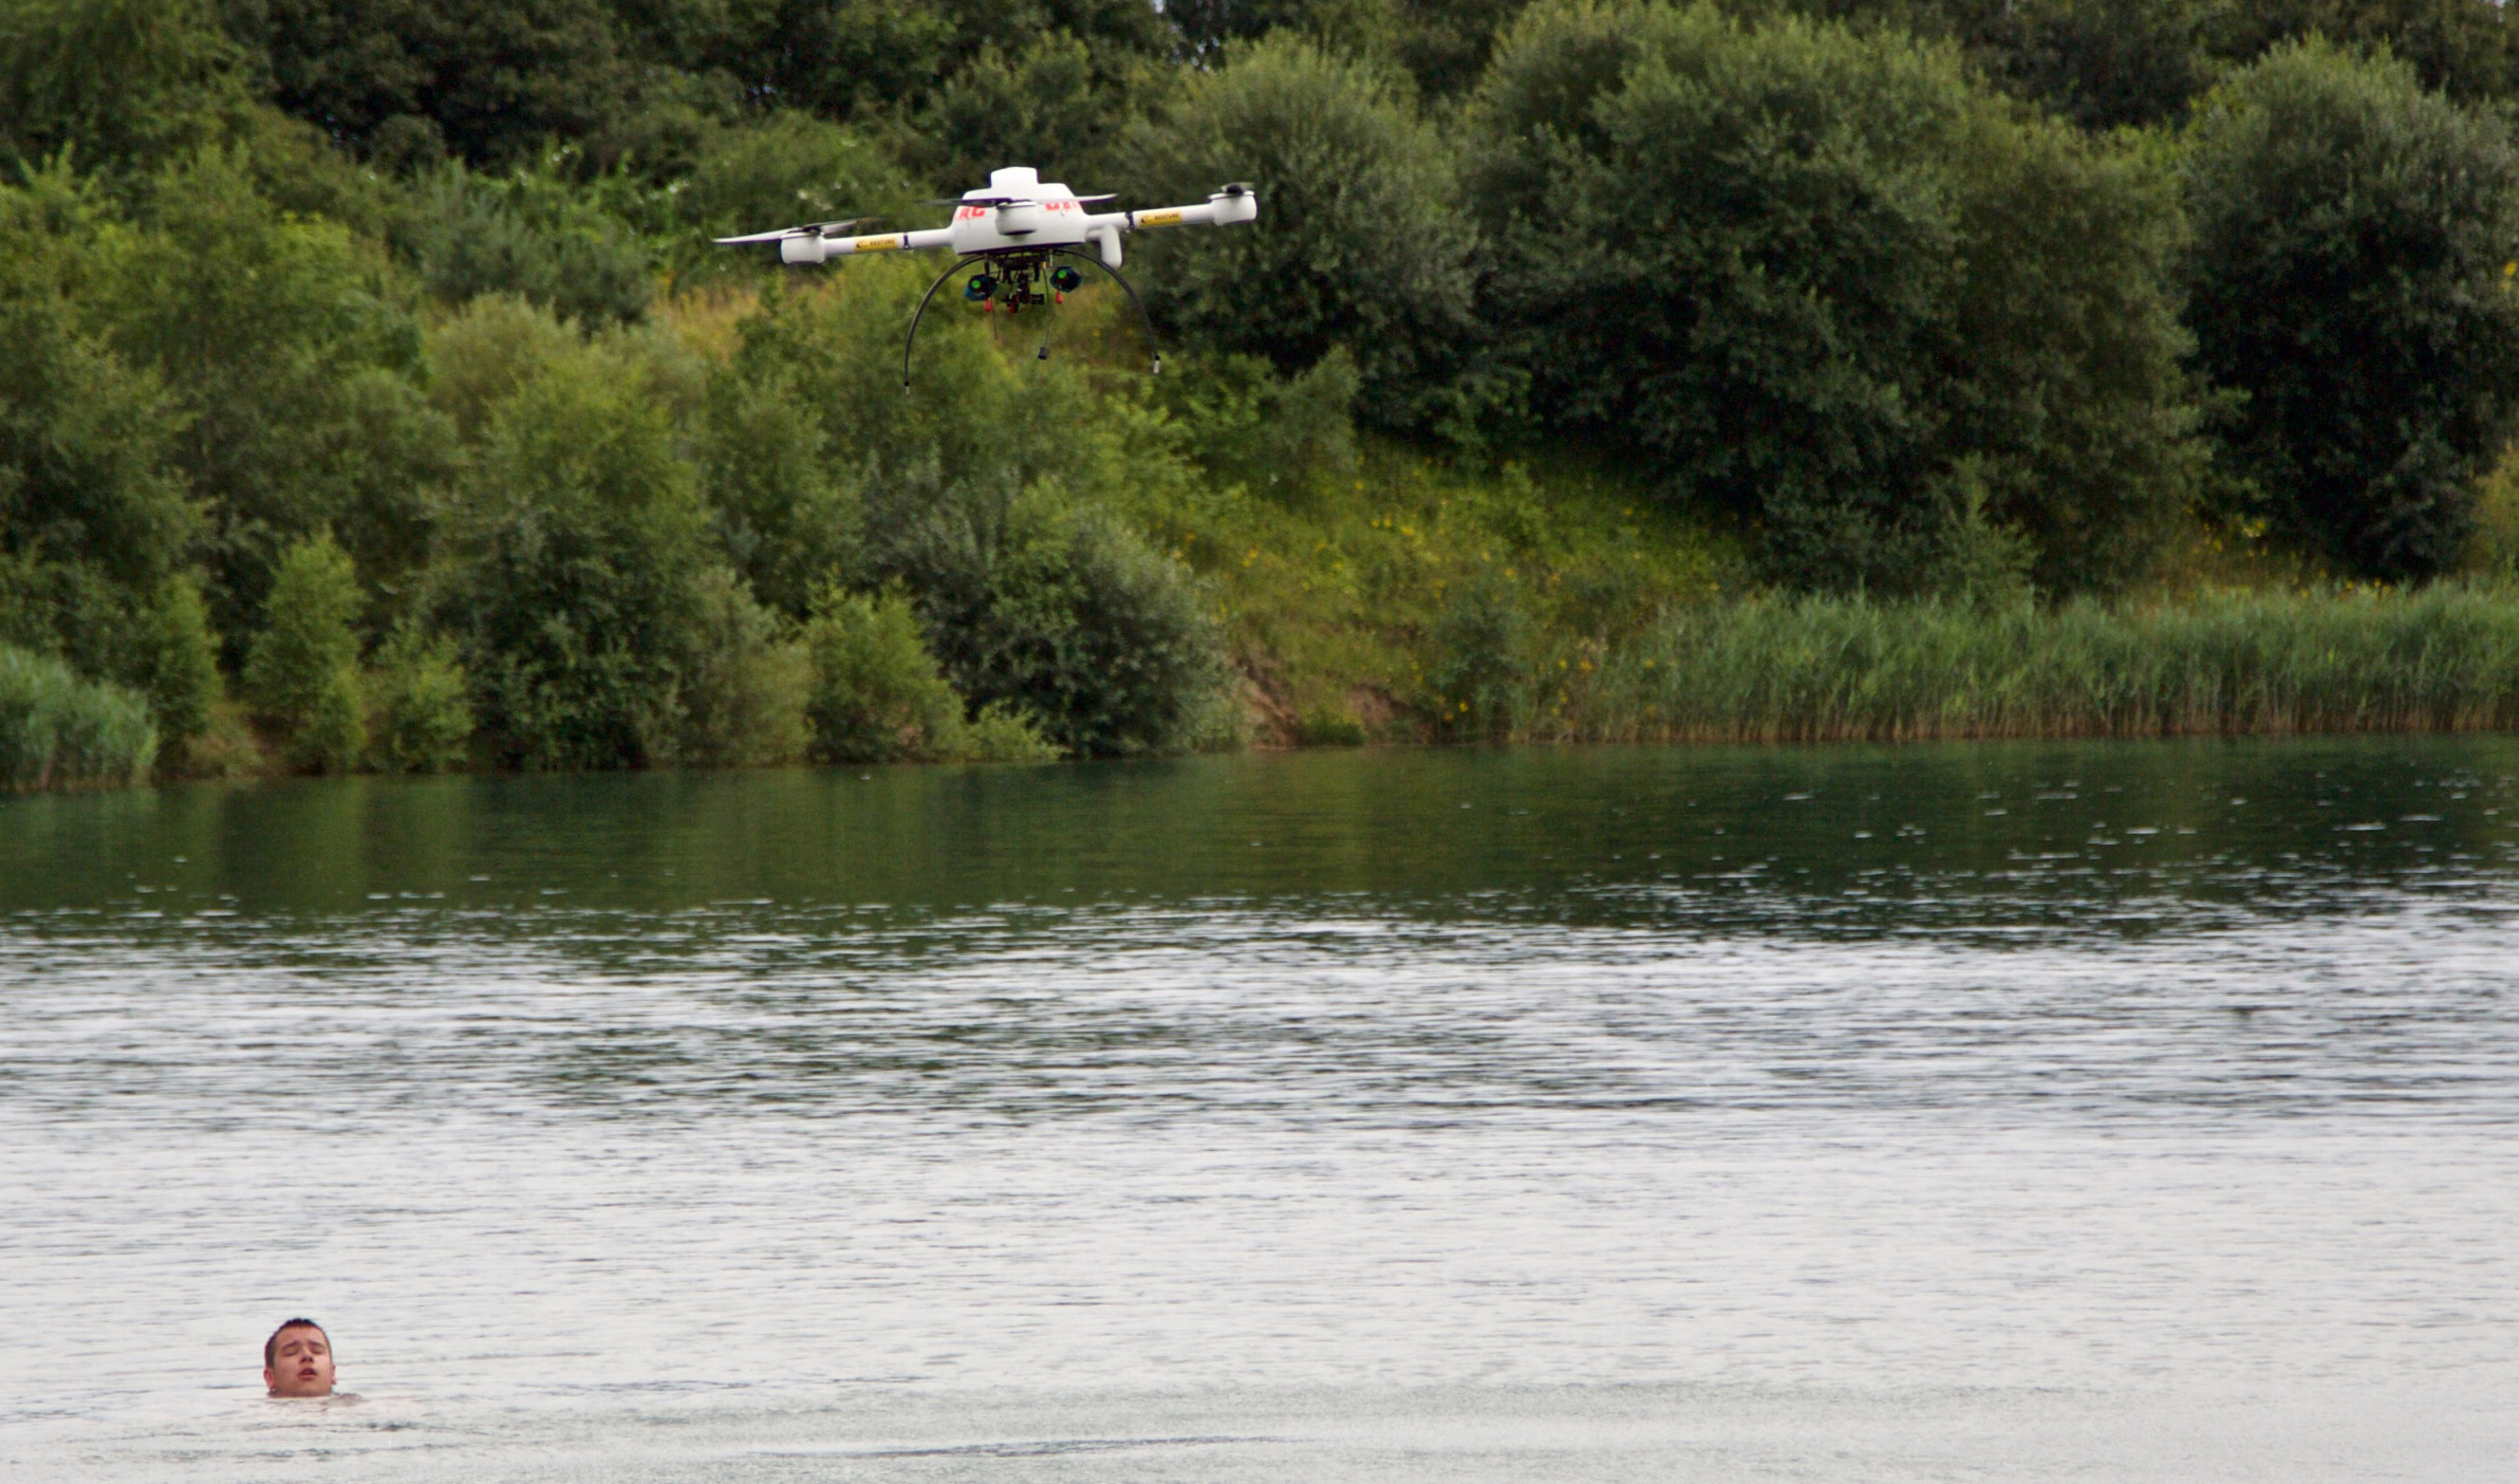 A microdrones md4-1000 UAS drops a compact rescue device called RESTUBE; the swimmer in this demonstration was able to grab onto the RESTUBE and float until they could be brought back to safety.